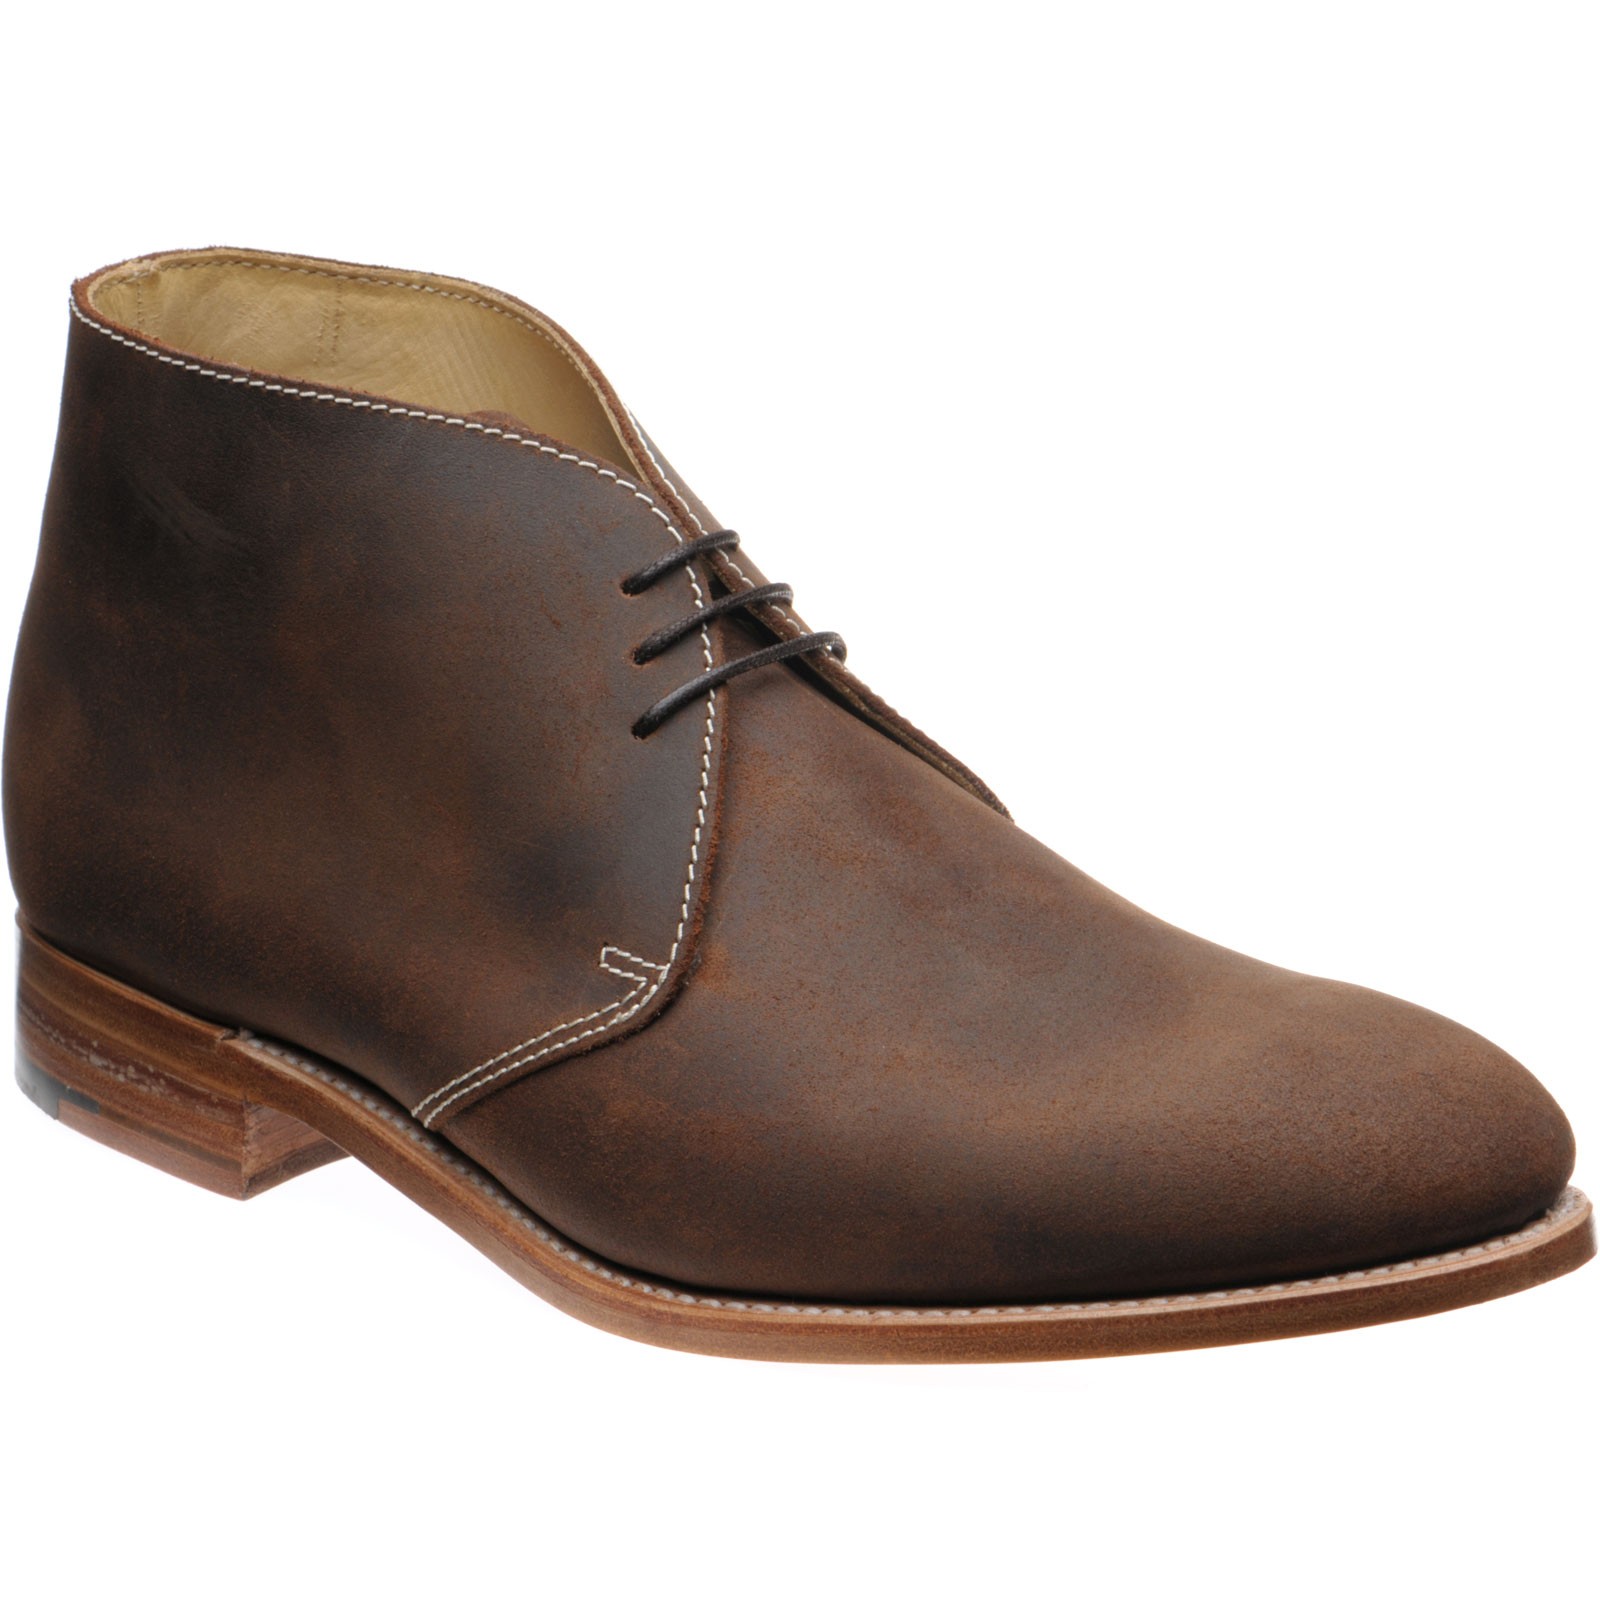 Herring shoes | Herring Classic | Orkney Chukka boots in Brown Waxy at ...